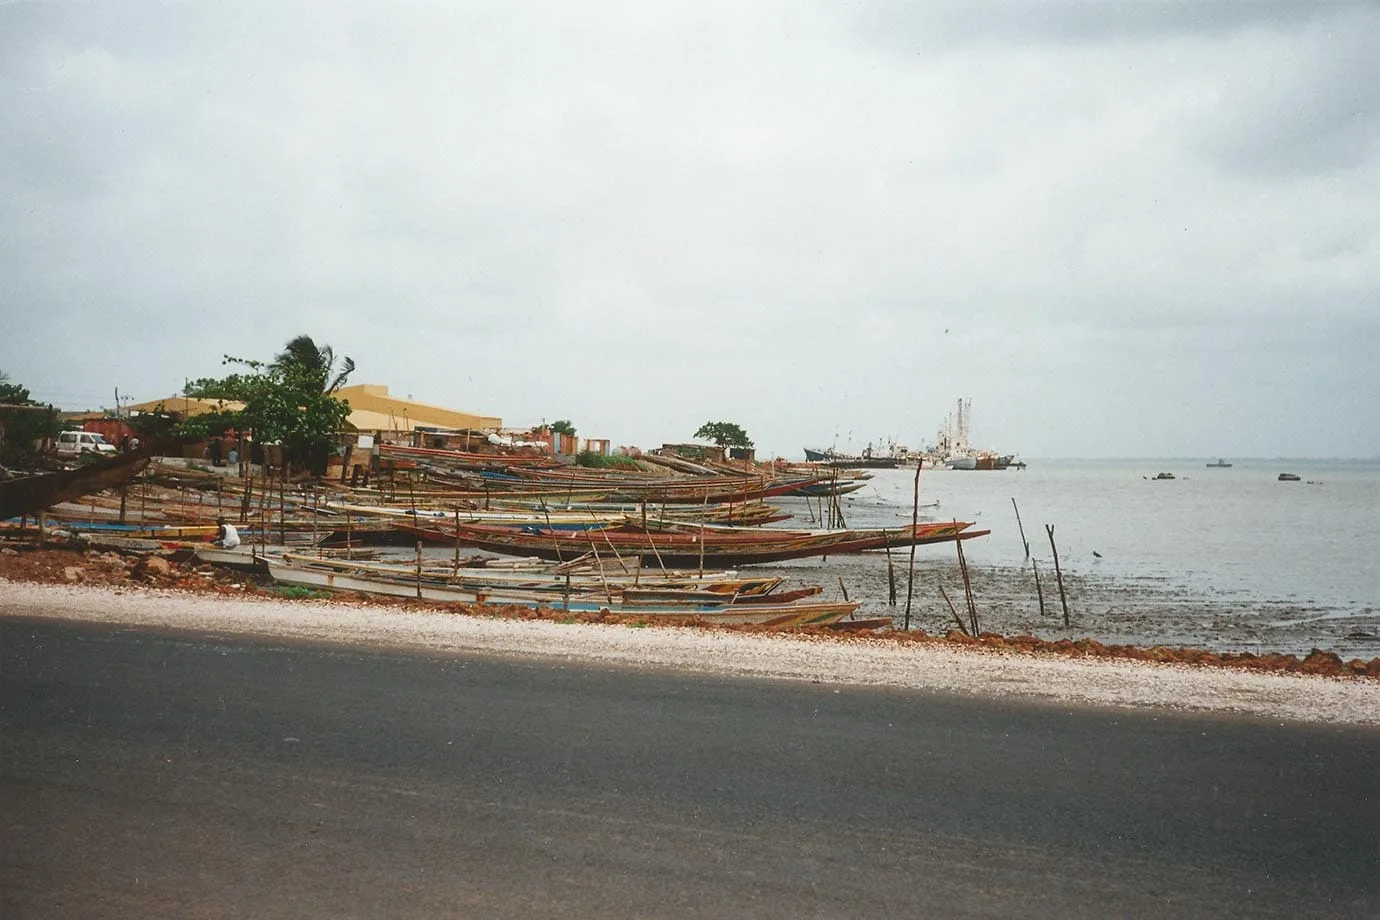 Beach in the Gambia 1994